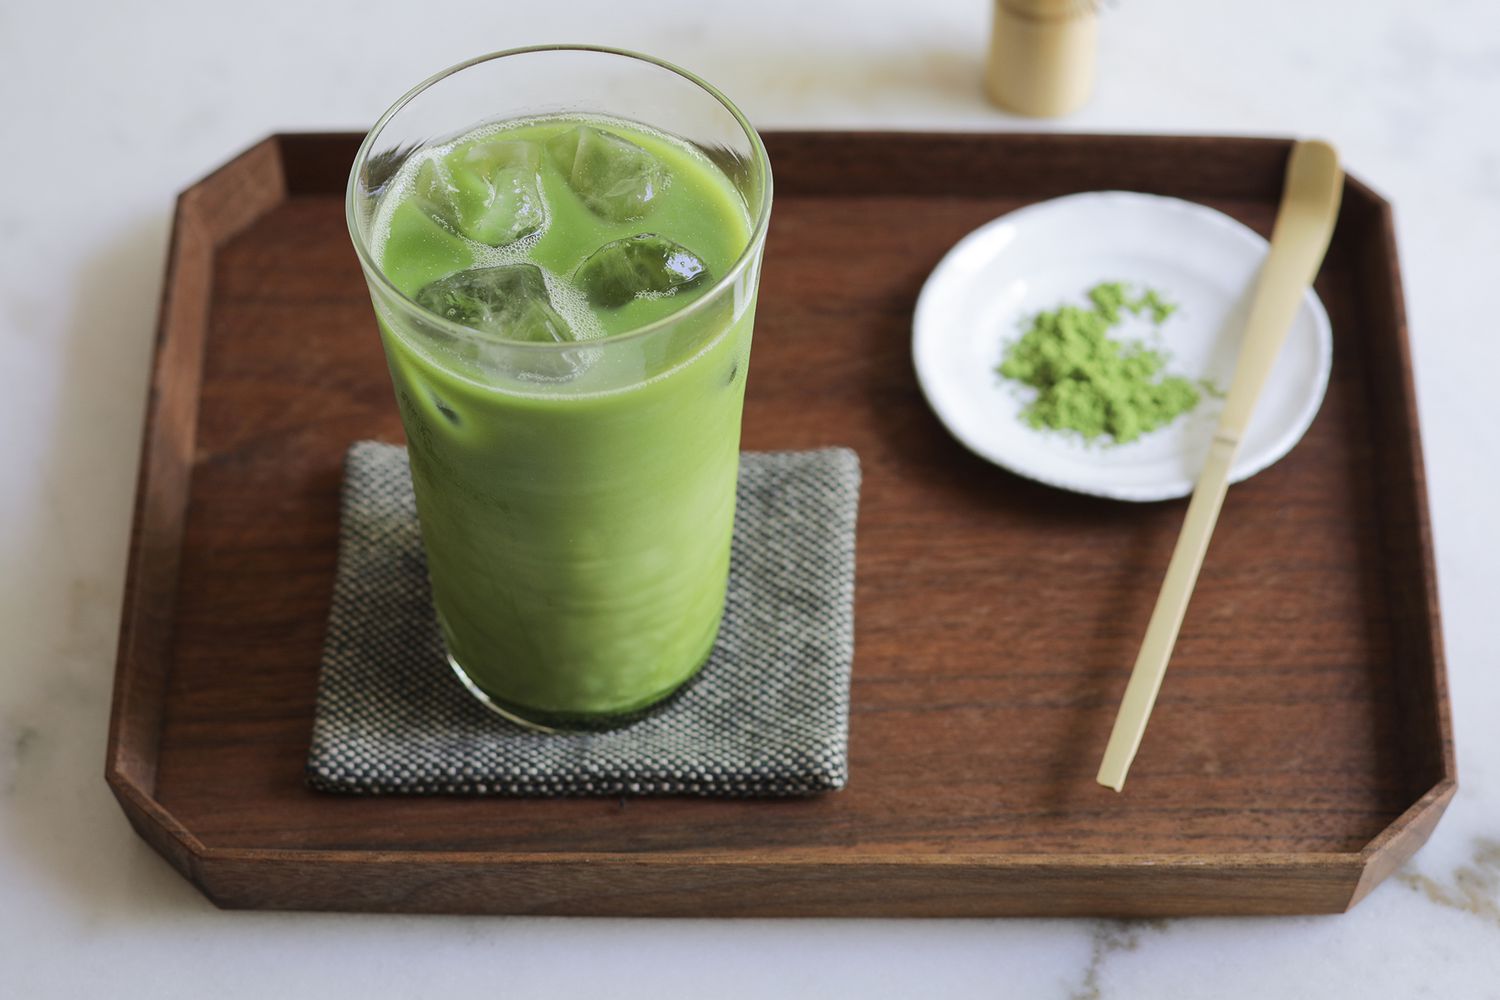 Health Benefits of Matcha, According to a Registered Dietitian